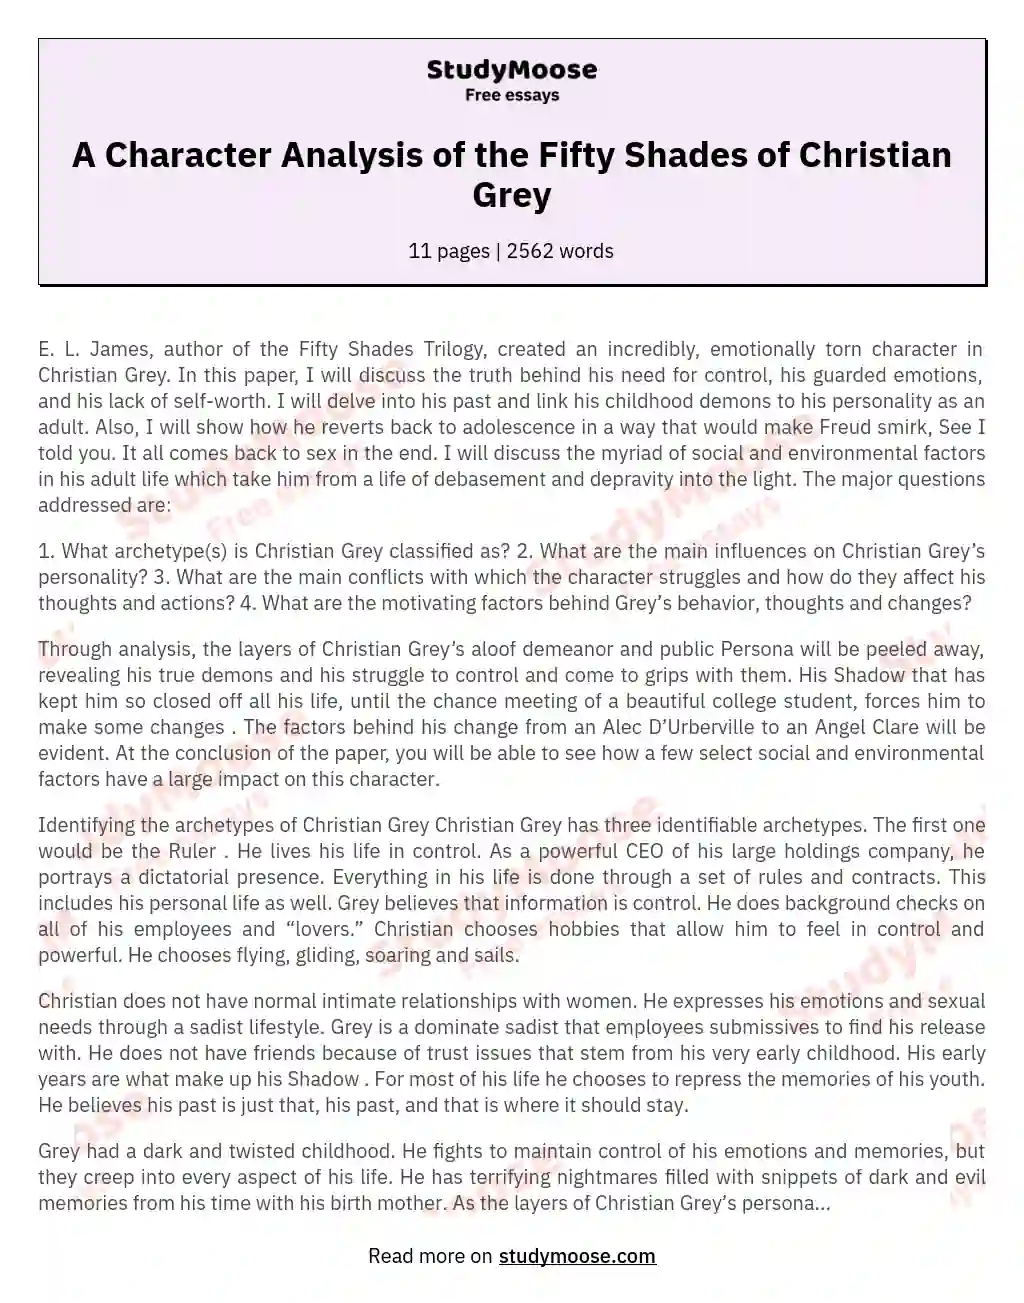 A Character Analysis of the Fifty Shades of Christian Grey essay